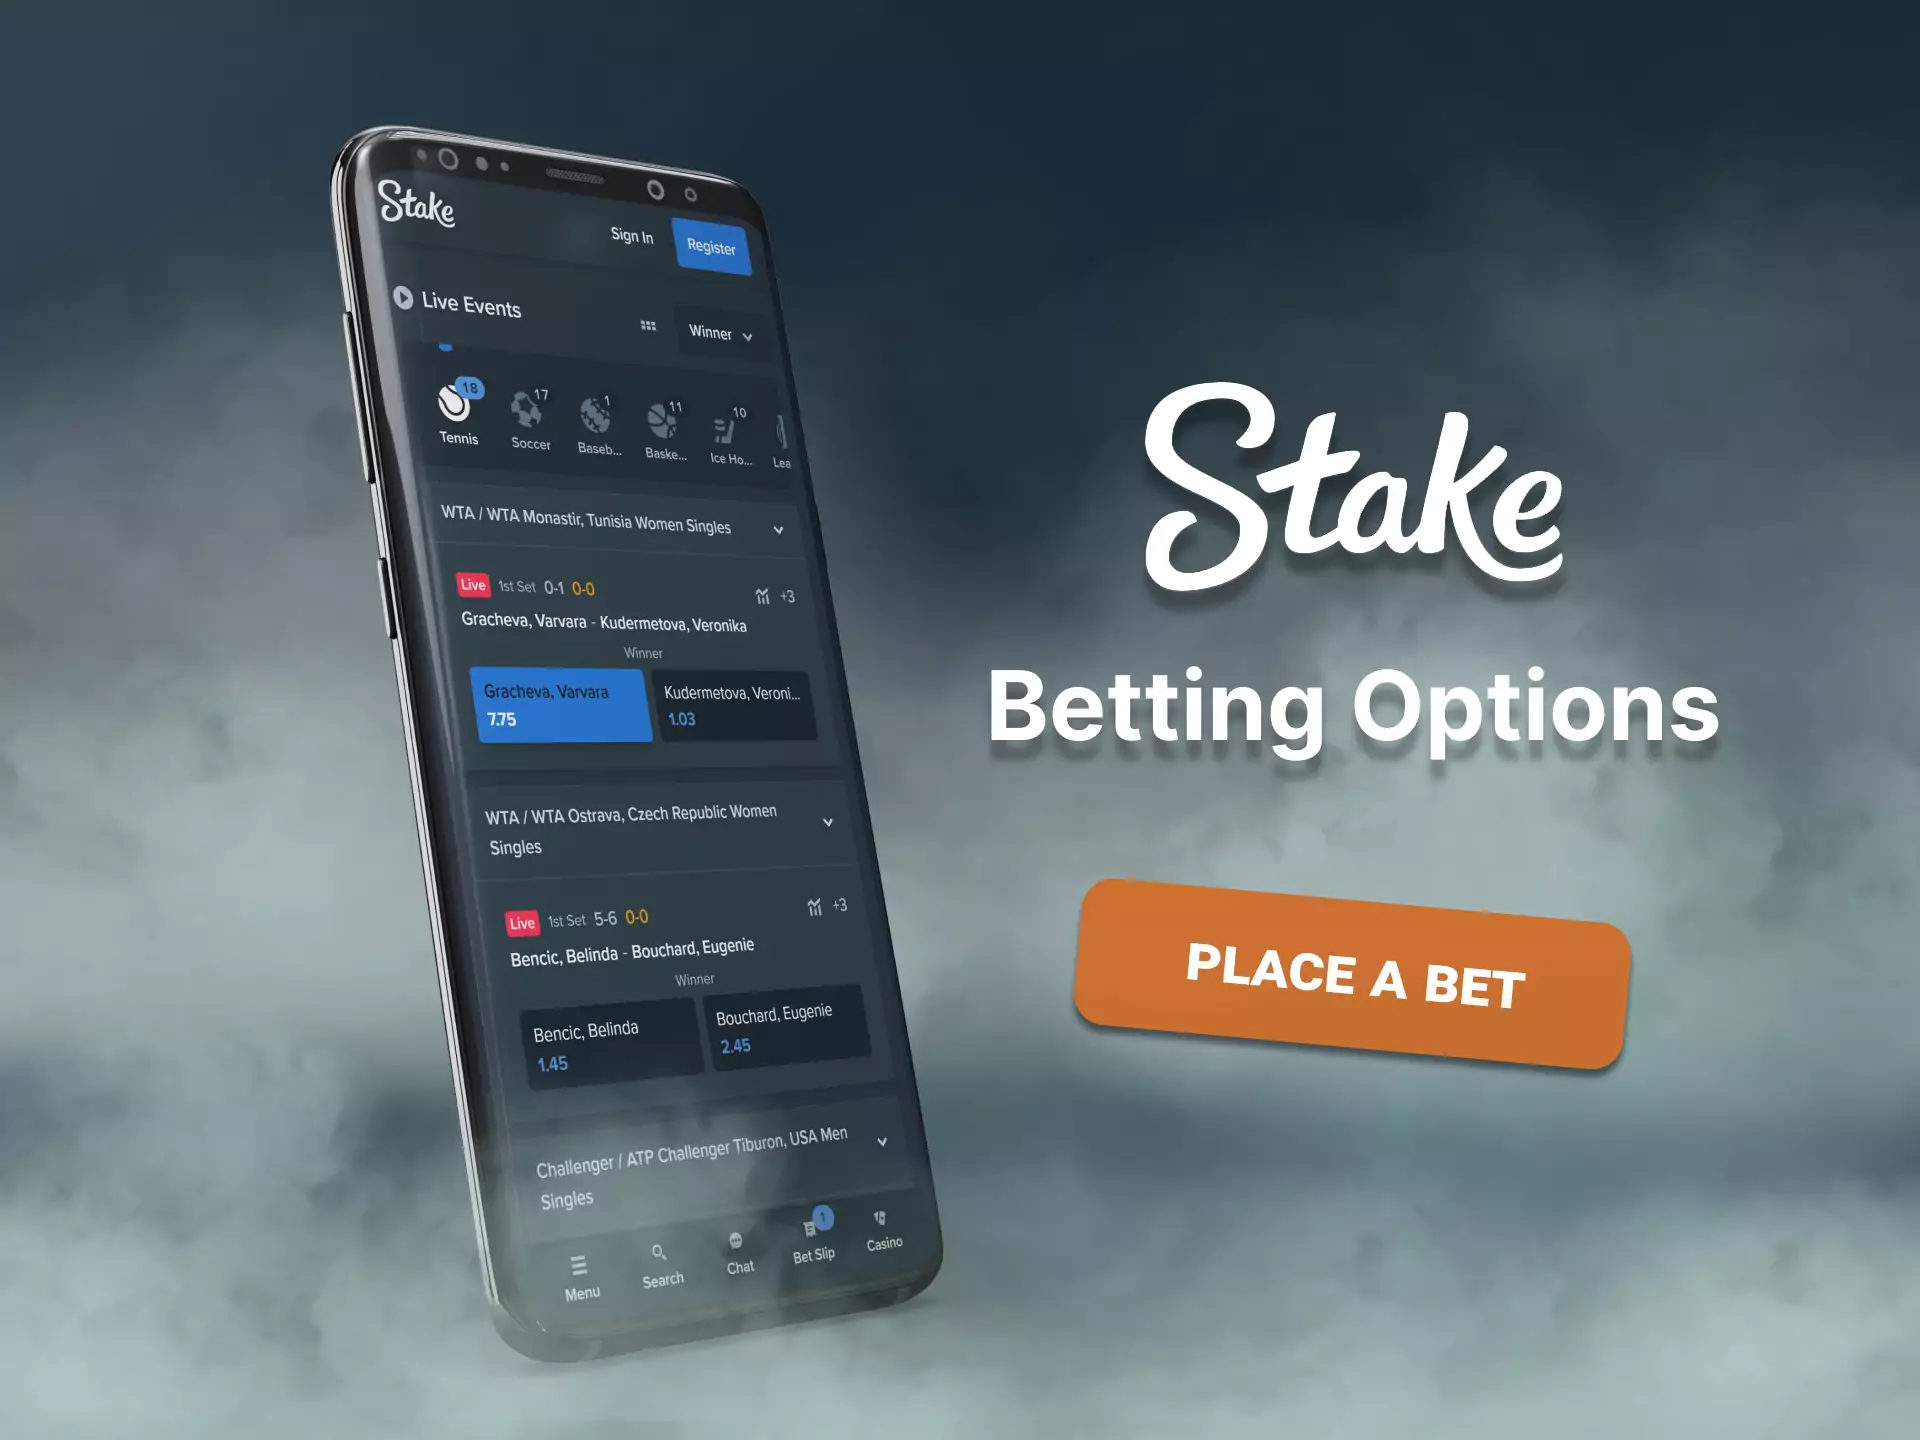 In Stake.com there are many convenient betting options for players.